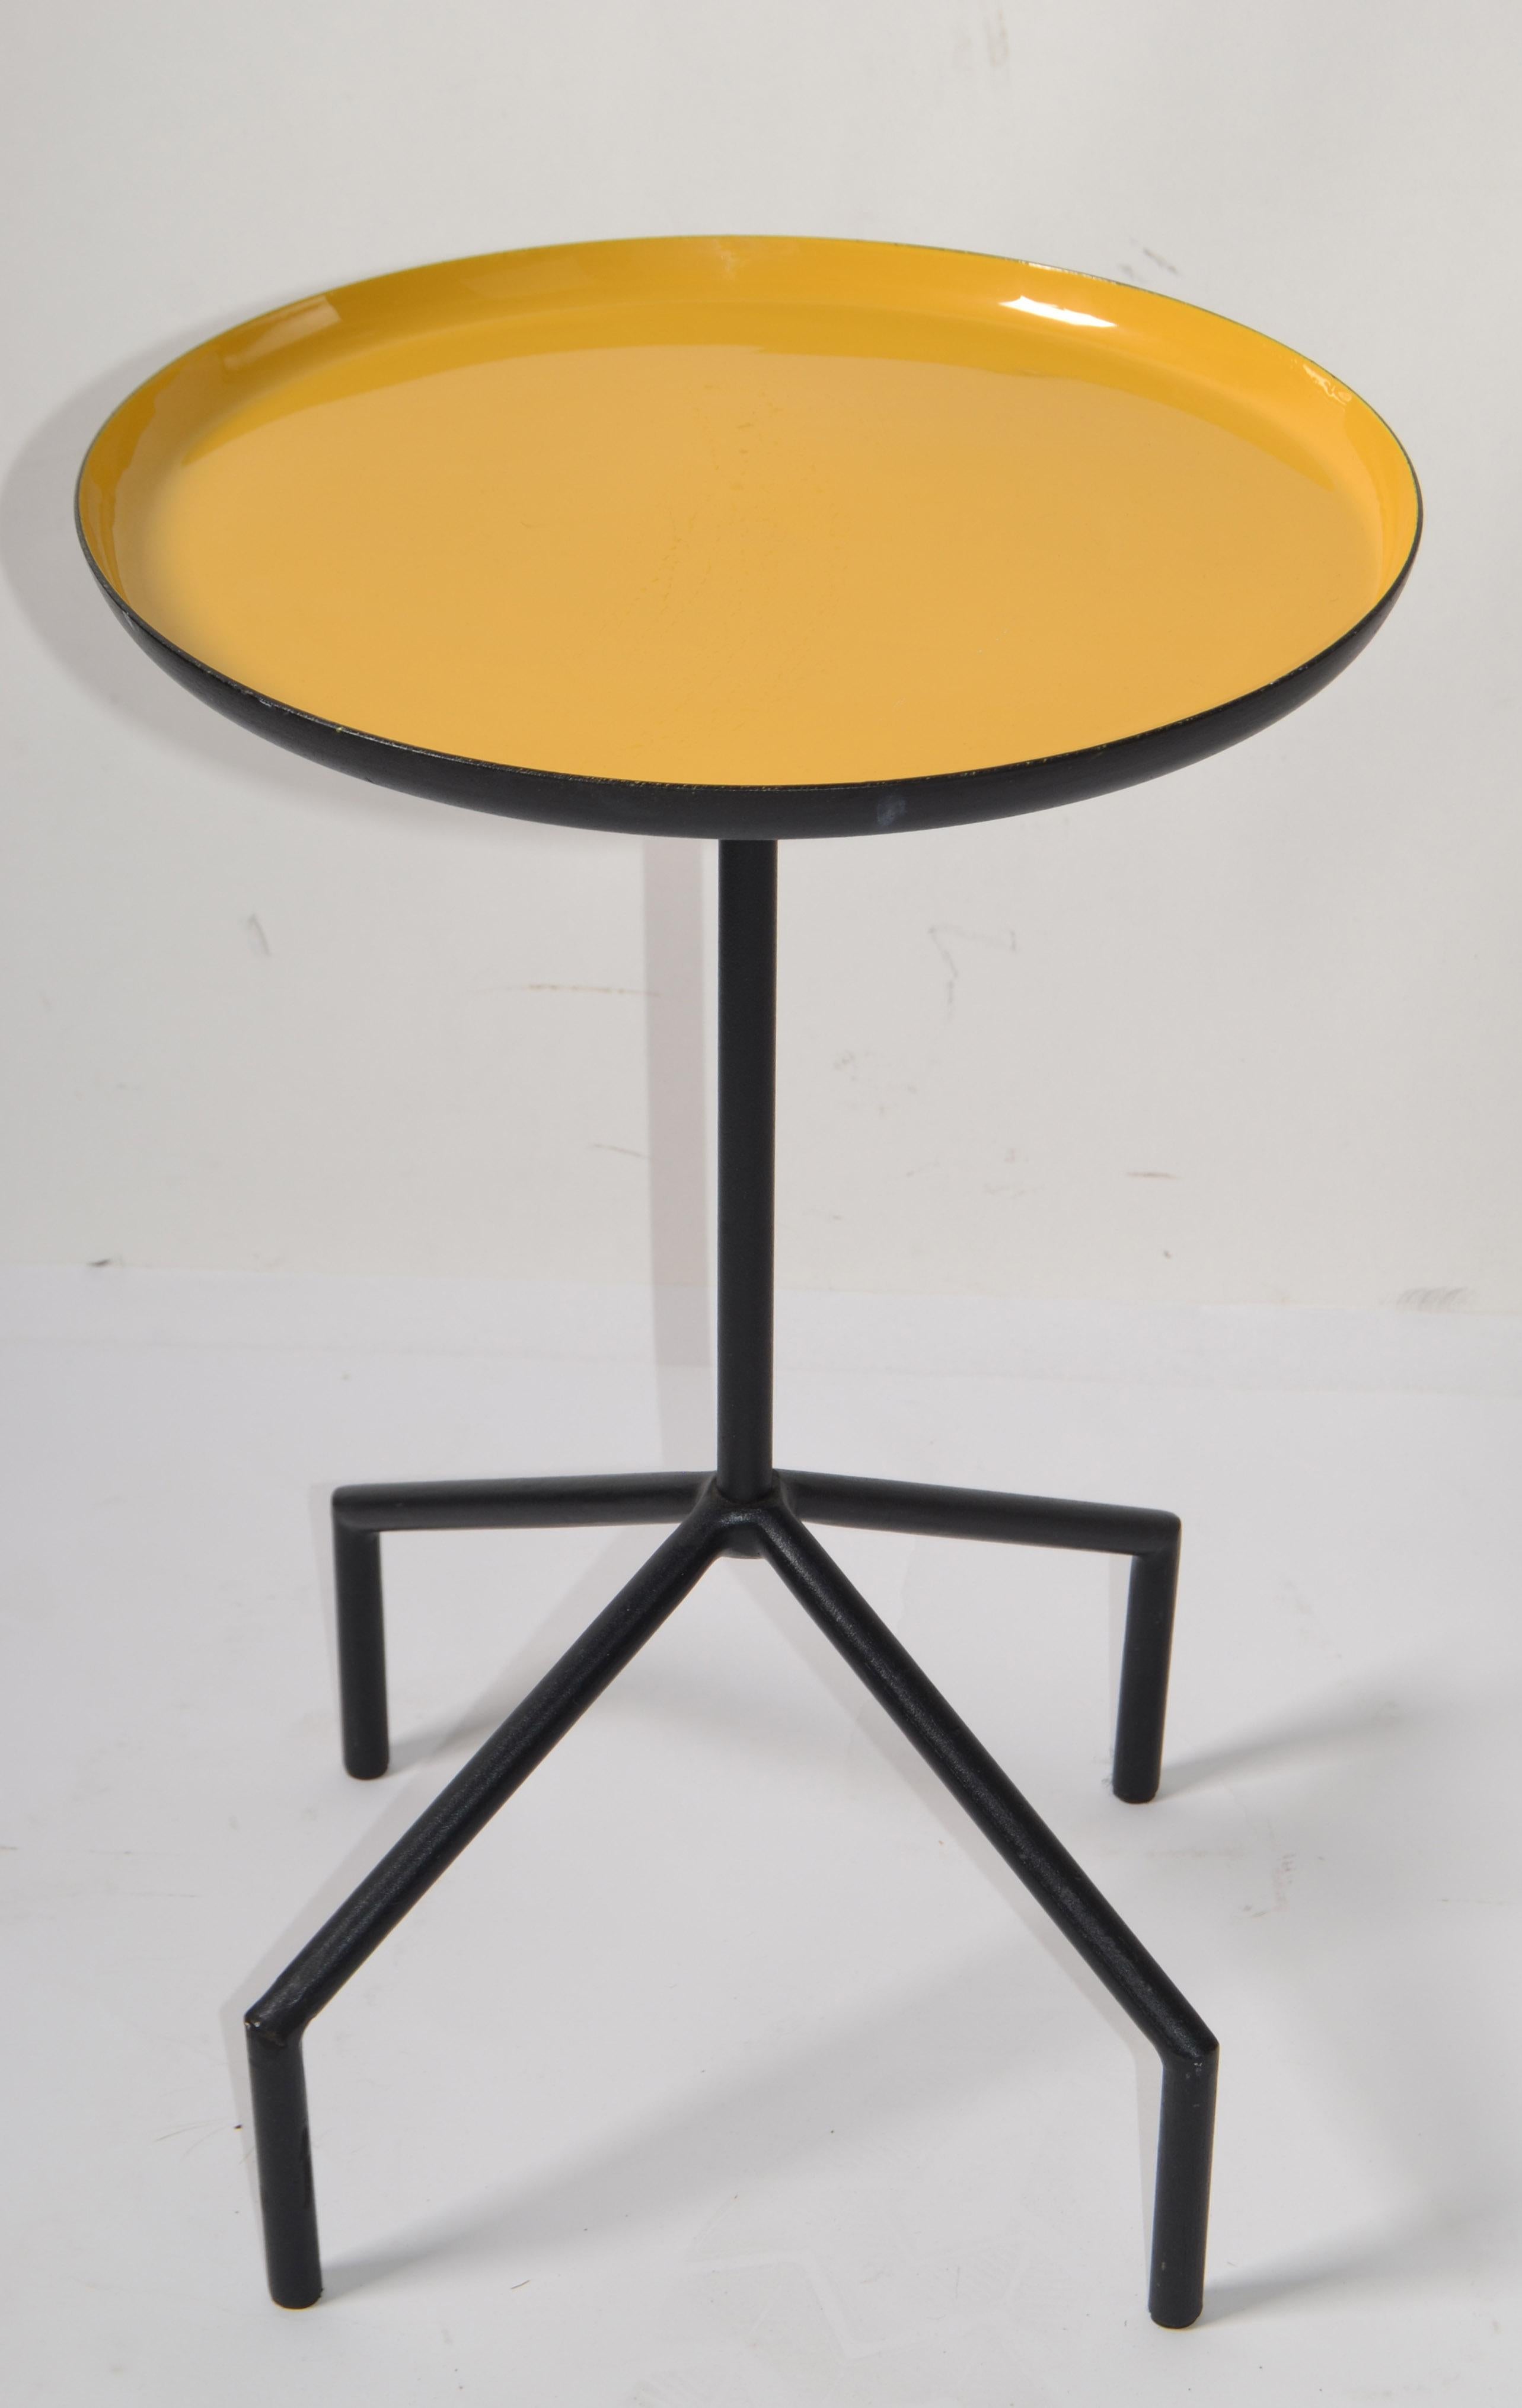 Hand-Crafted 1980 Herman Miller Style Yellow Enamel Tray Side Table Black Iron Gazelle Base For Sale